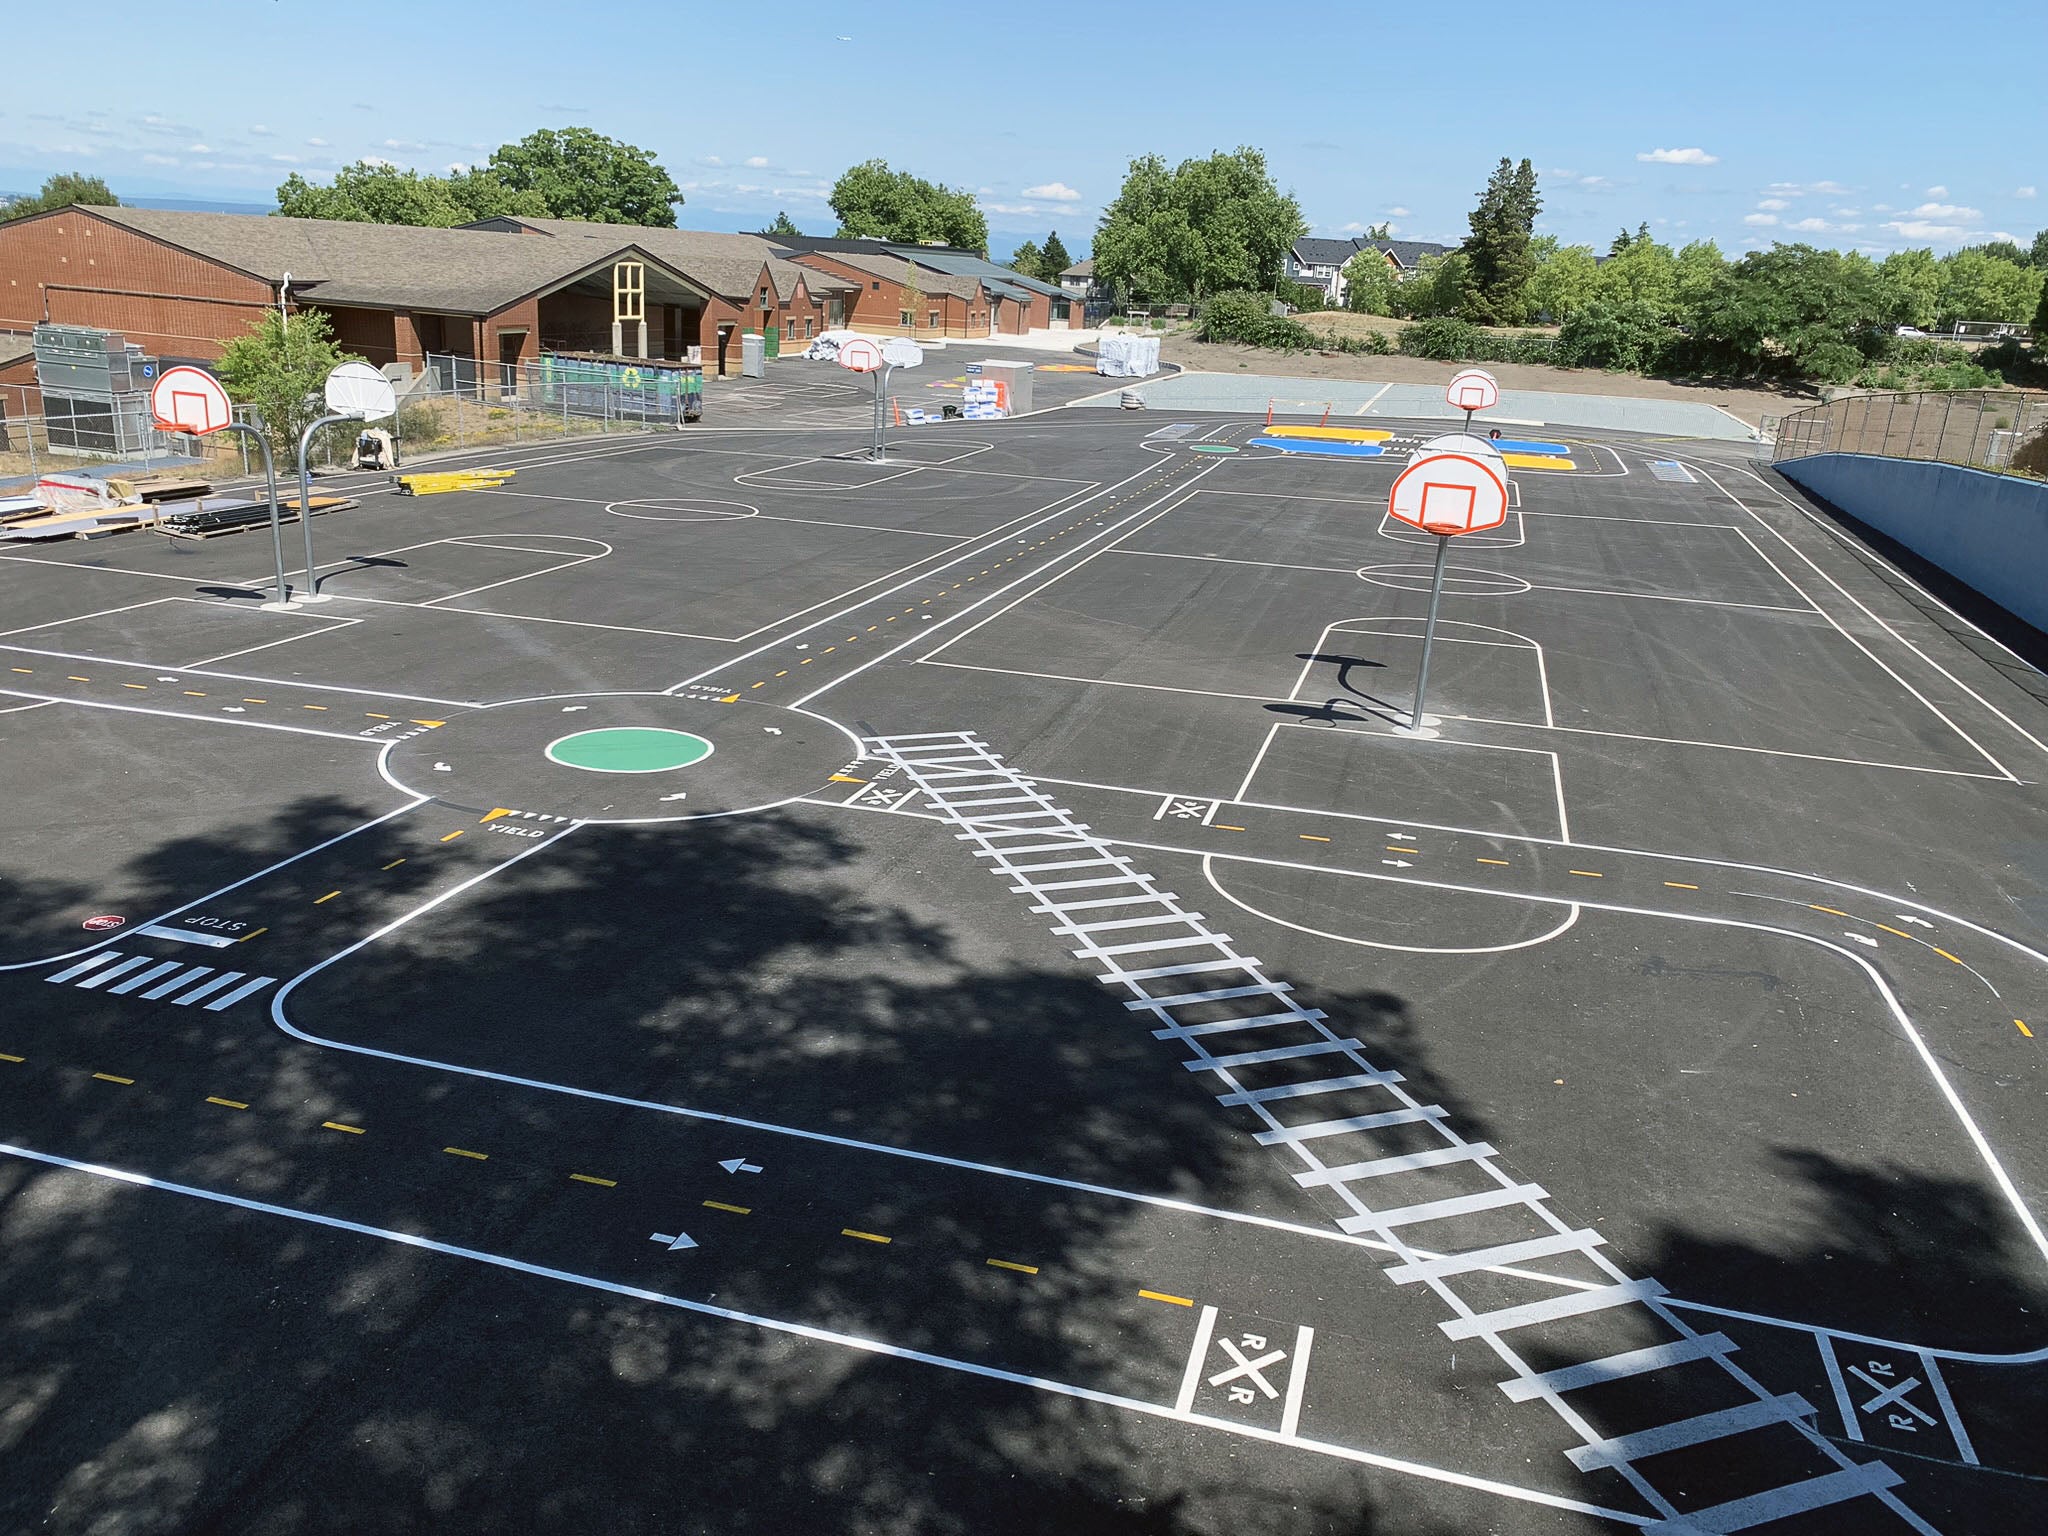 a paved area has lines for baskeball and basketball hoops, plus painted bike traffic lines